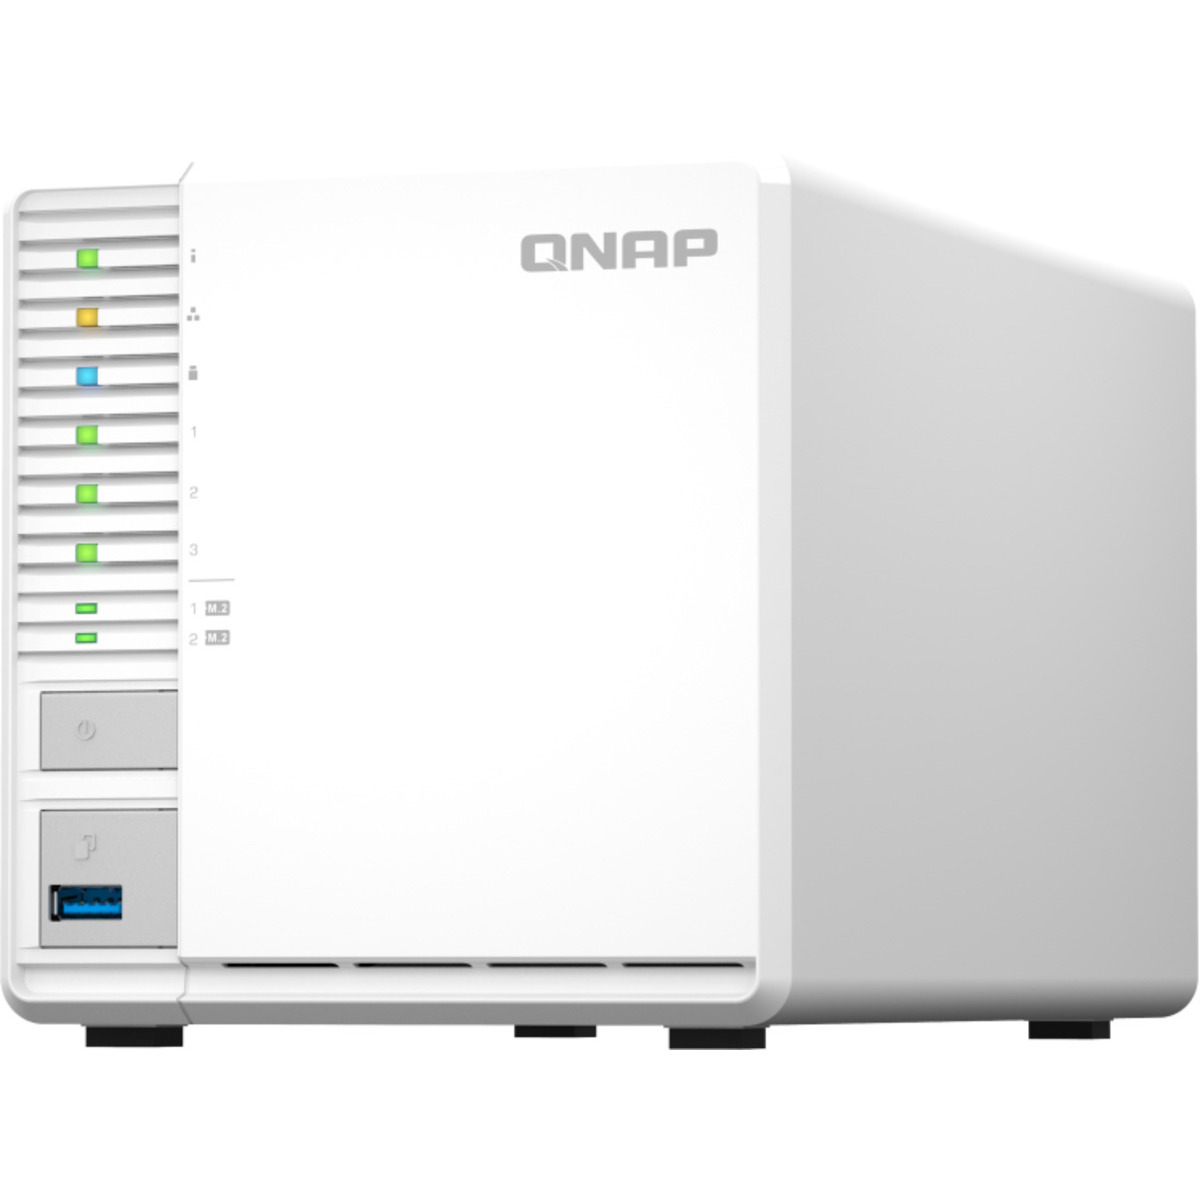 buy QNAP TS-364 12tb Desktop NAS - Network Attached Storage Device 3x4000gb Toshiba MN Series MN08ADA400E 3.5 7200rpm SATA 6Gb/s HDD NAS Class Drives Installed - Burn-In Tested - ON SALE - nas headquarters buy network attached storage server device das new raid-5 free shipping simply usa christmas holiday black friday cyber monday week sale happening now! TS-364